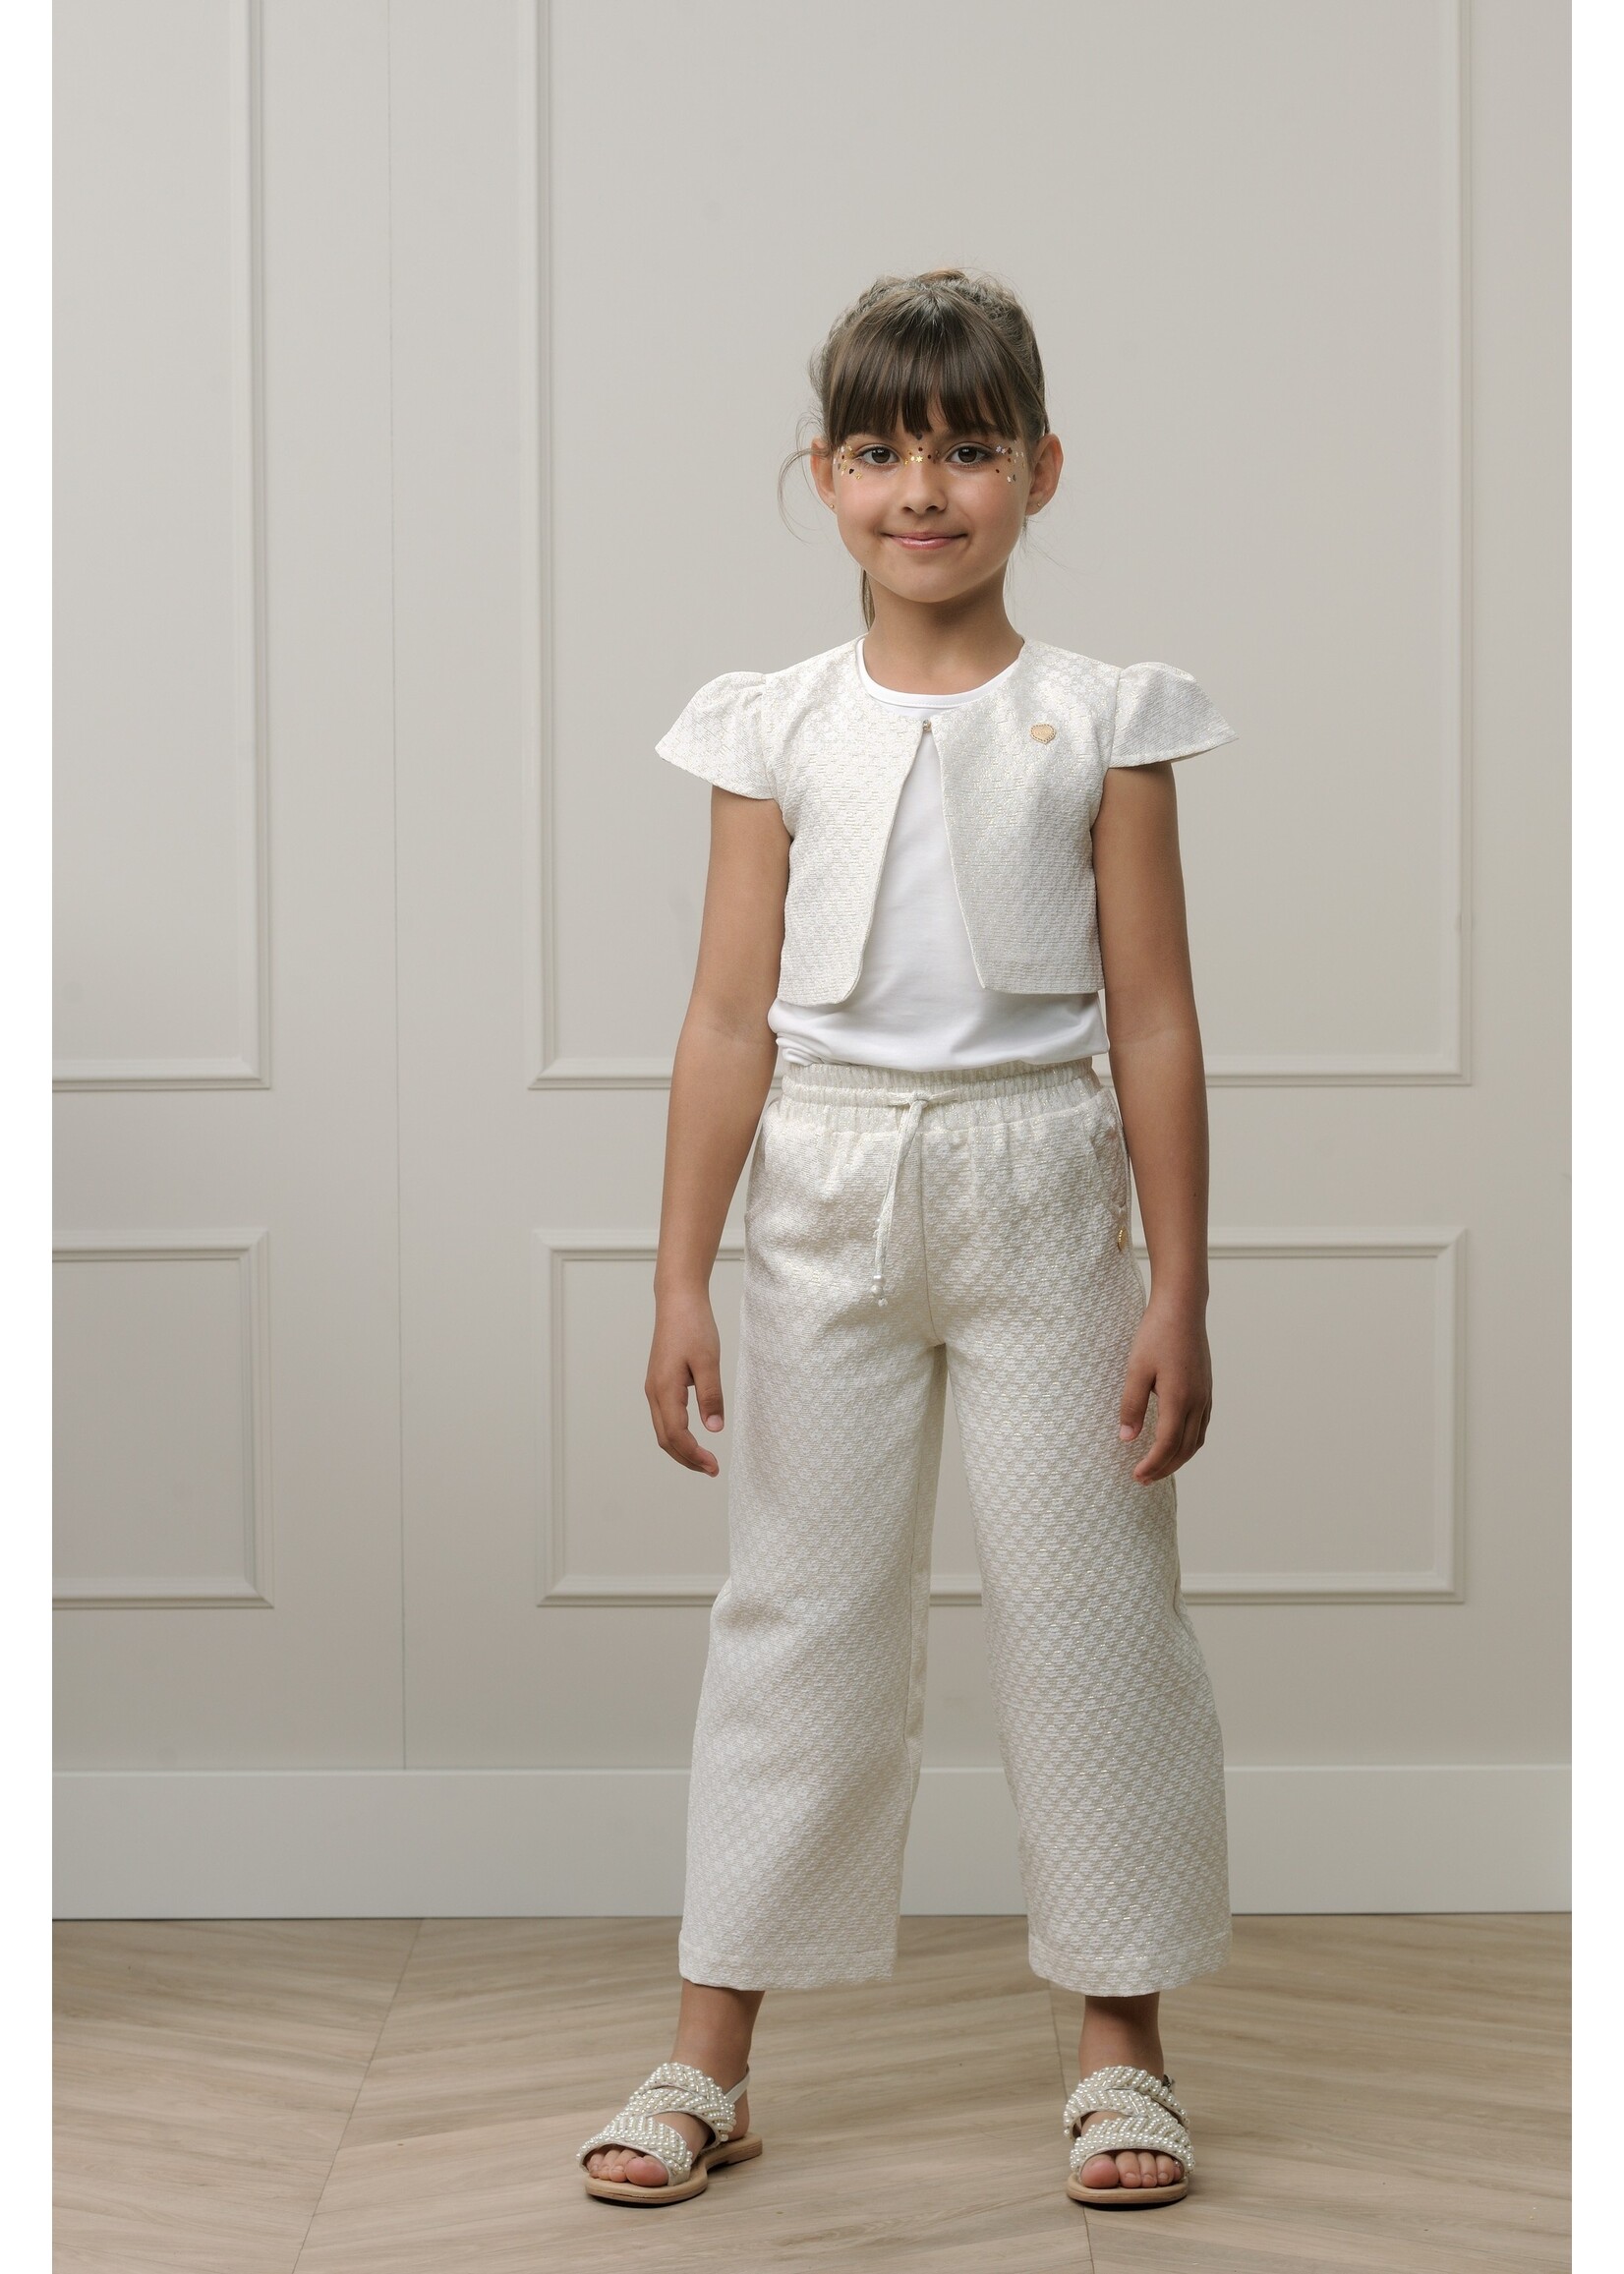 Le Chic Girls Kids C312-5602 DULCE flowers & lurex trousers Champagne